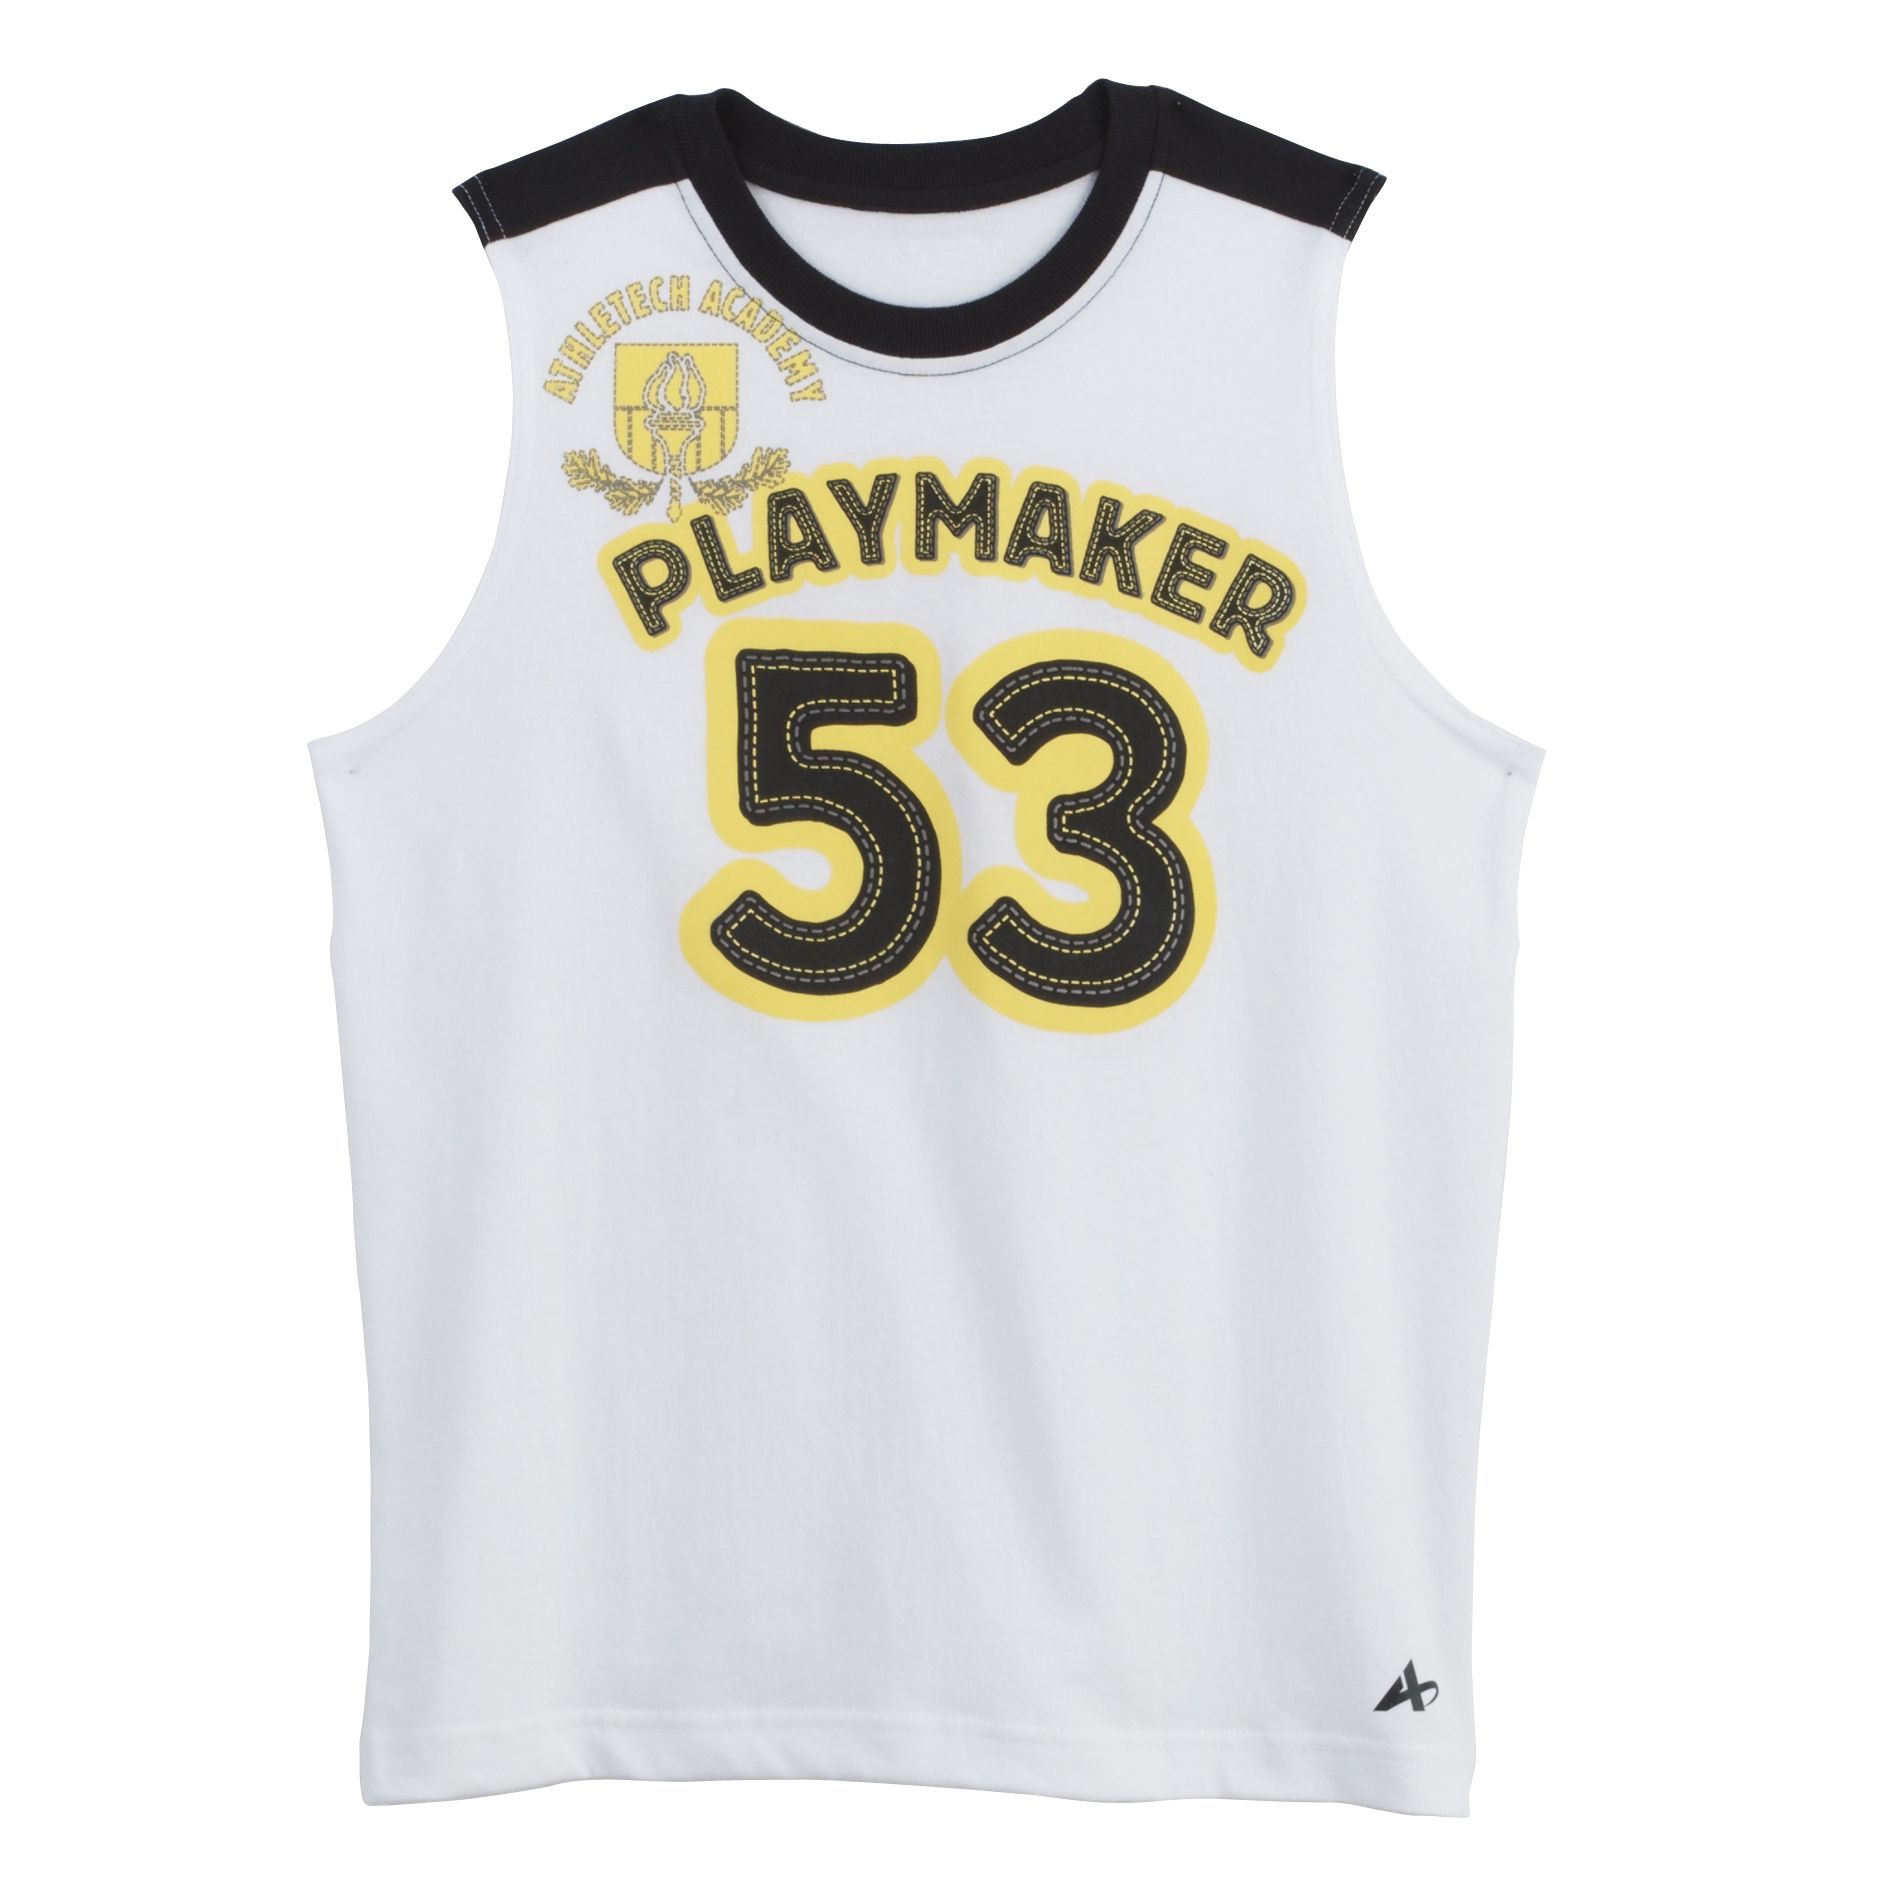 Athletech Boy's Playmaker Muscle Tee